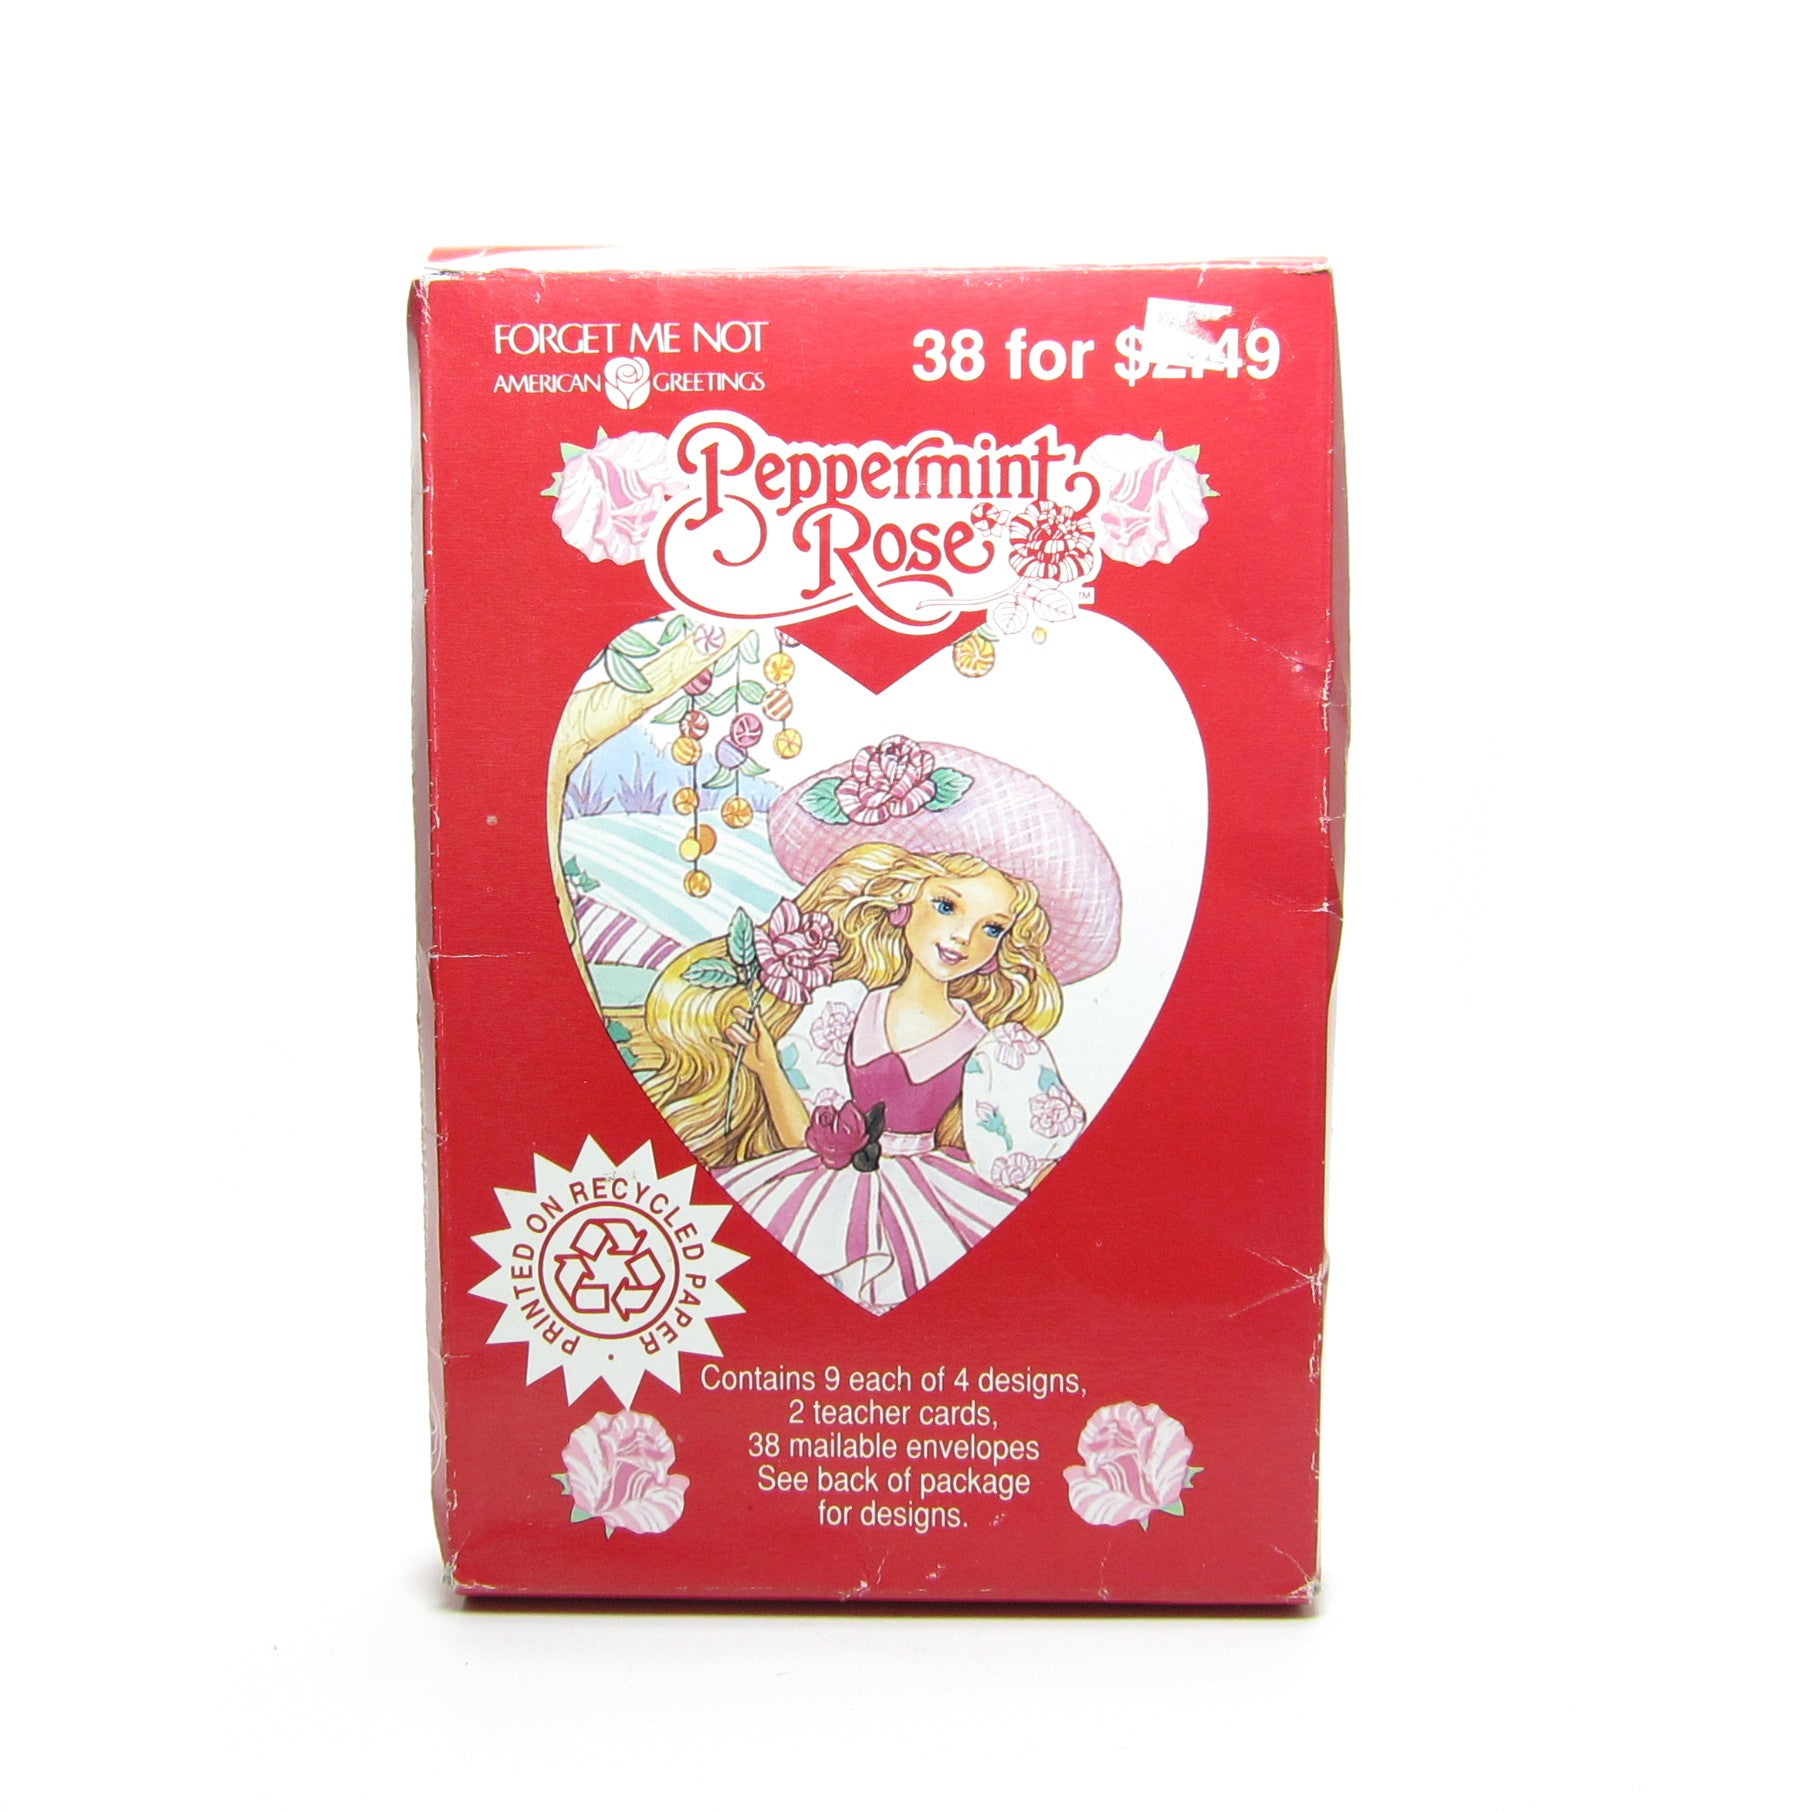 Peppermint Rose Valentines 1993 Vintage Box of 38 Valentine's Day